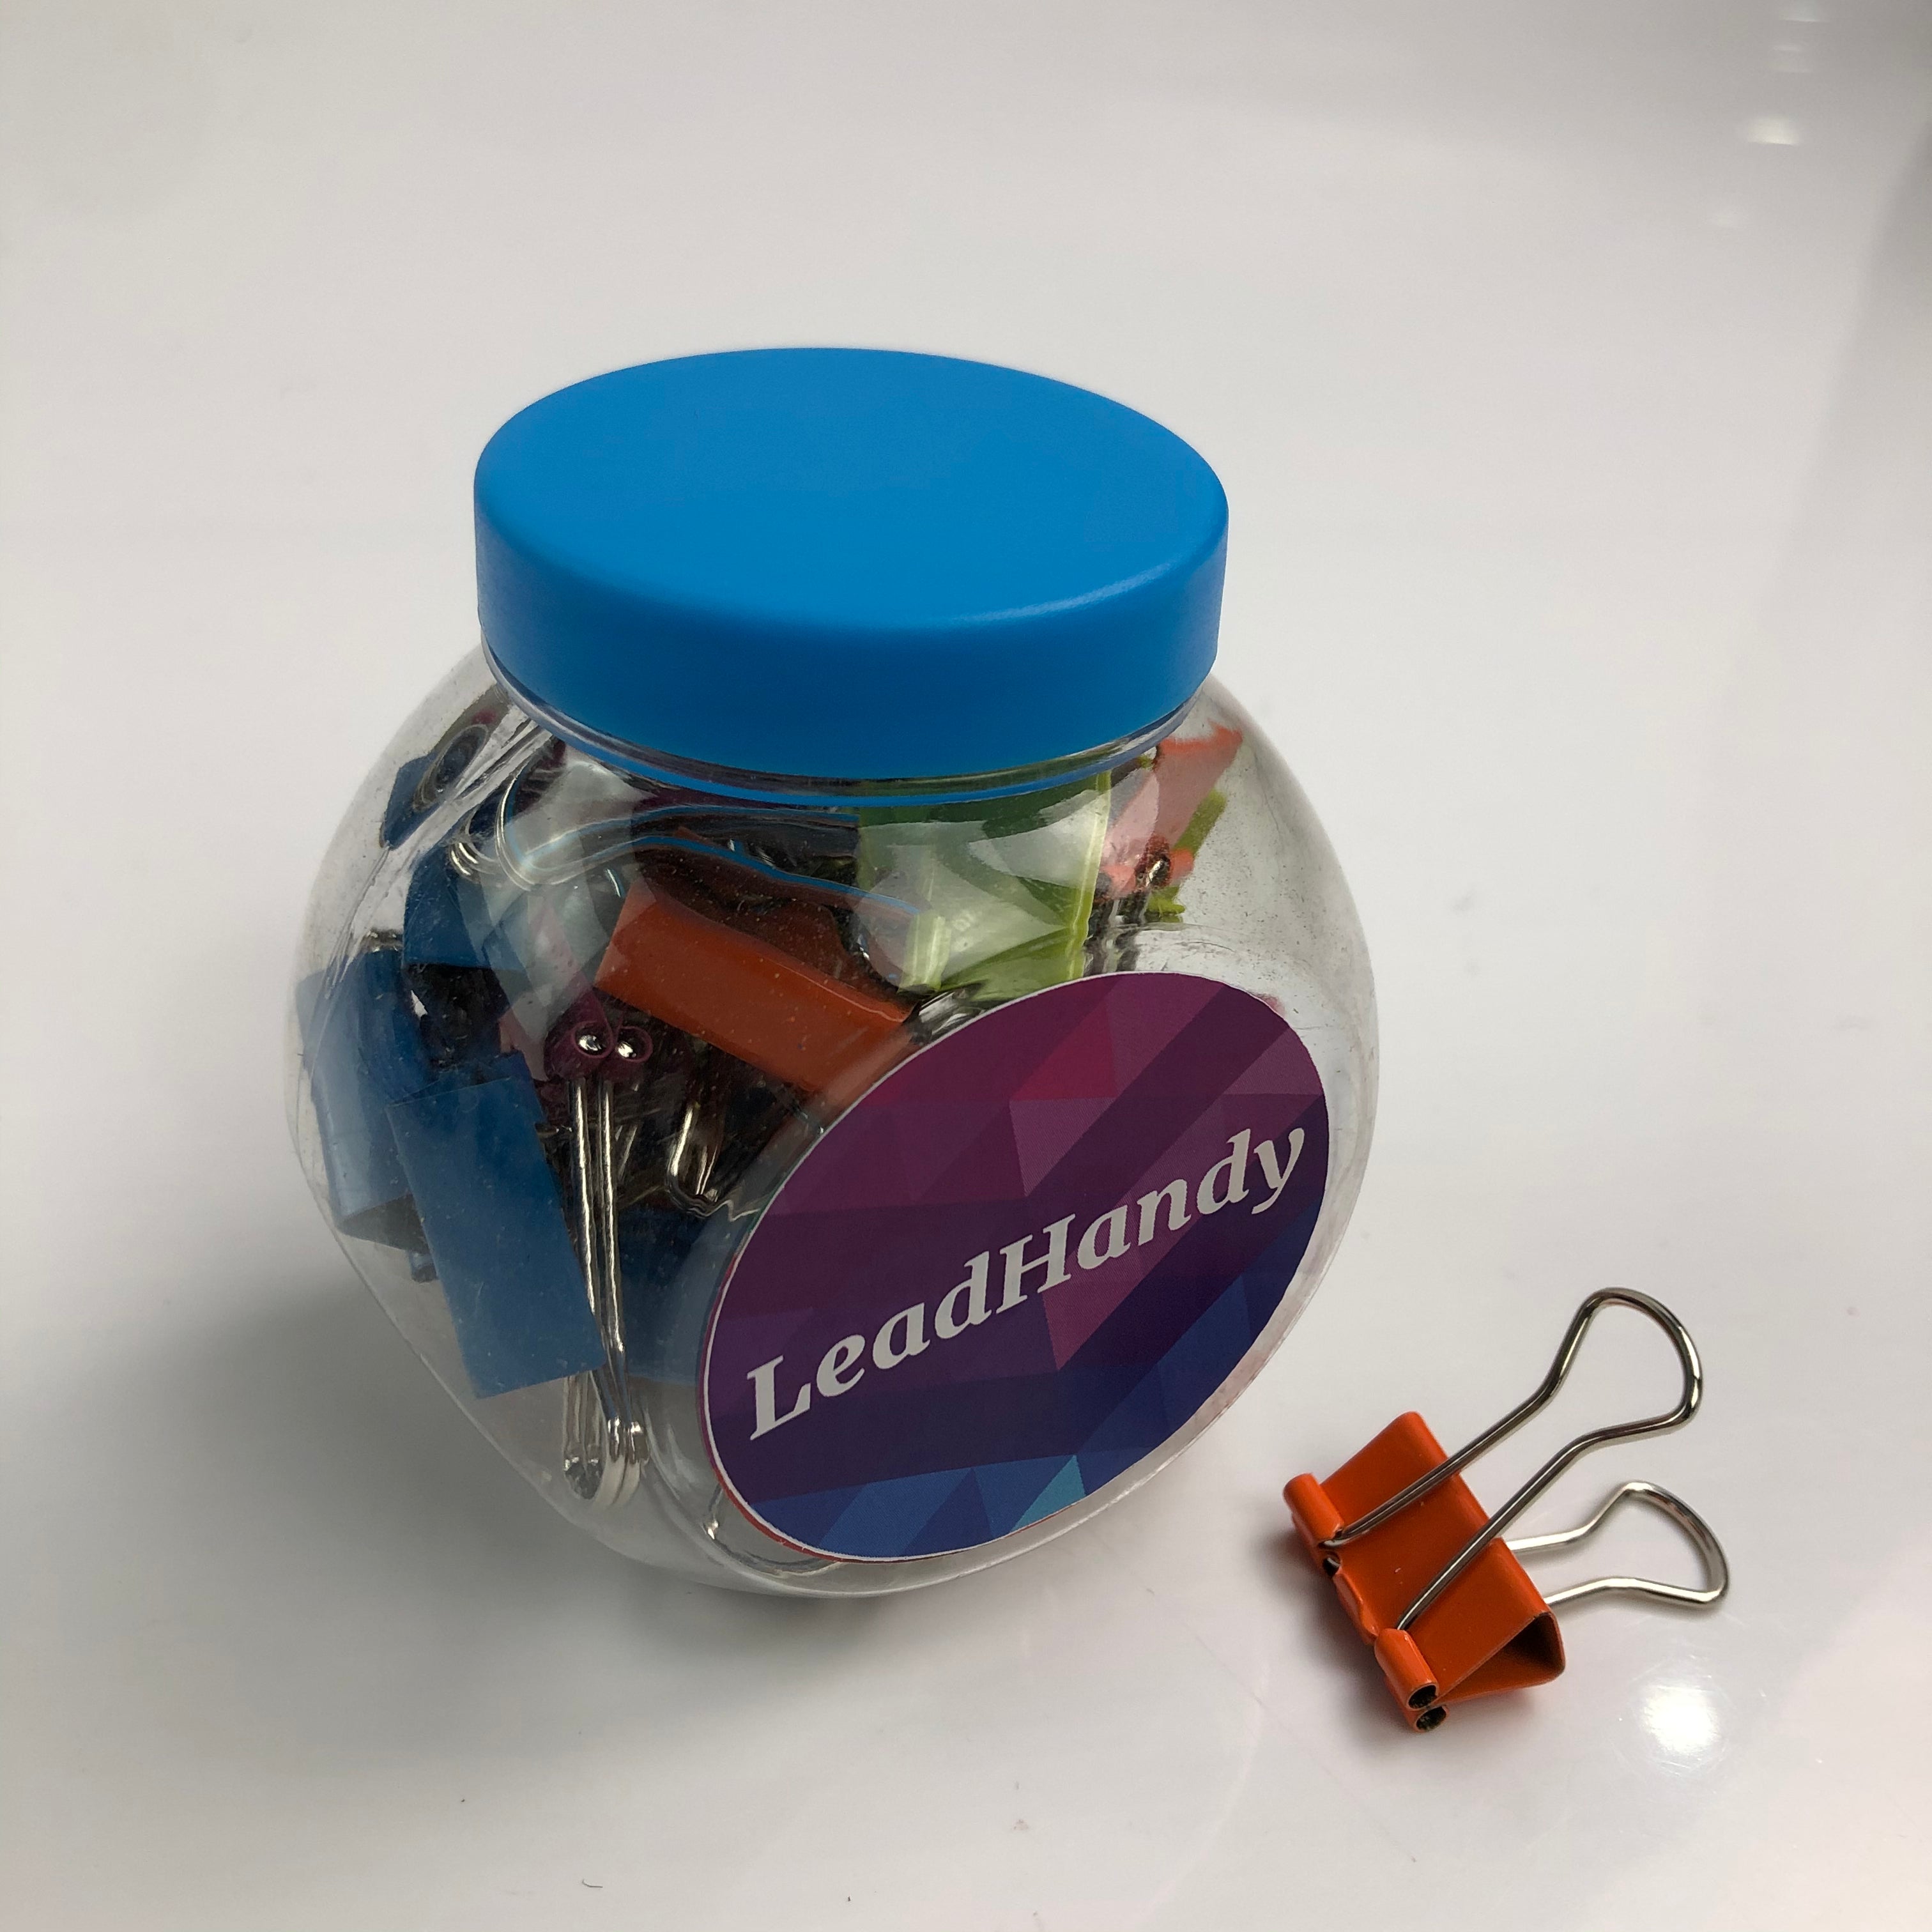 LeadHandy Paper Binder Clips - Glow Guards